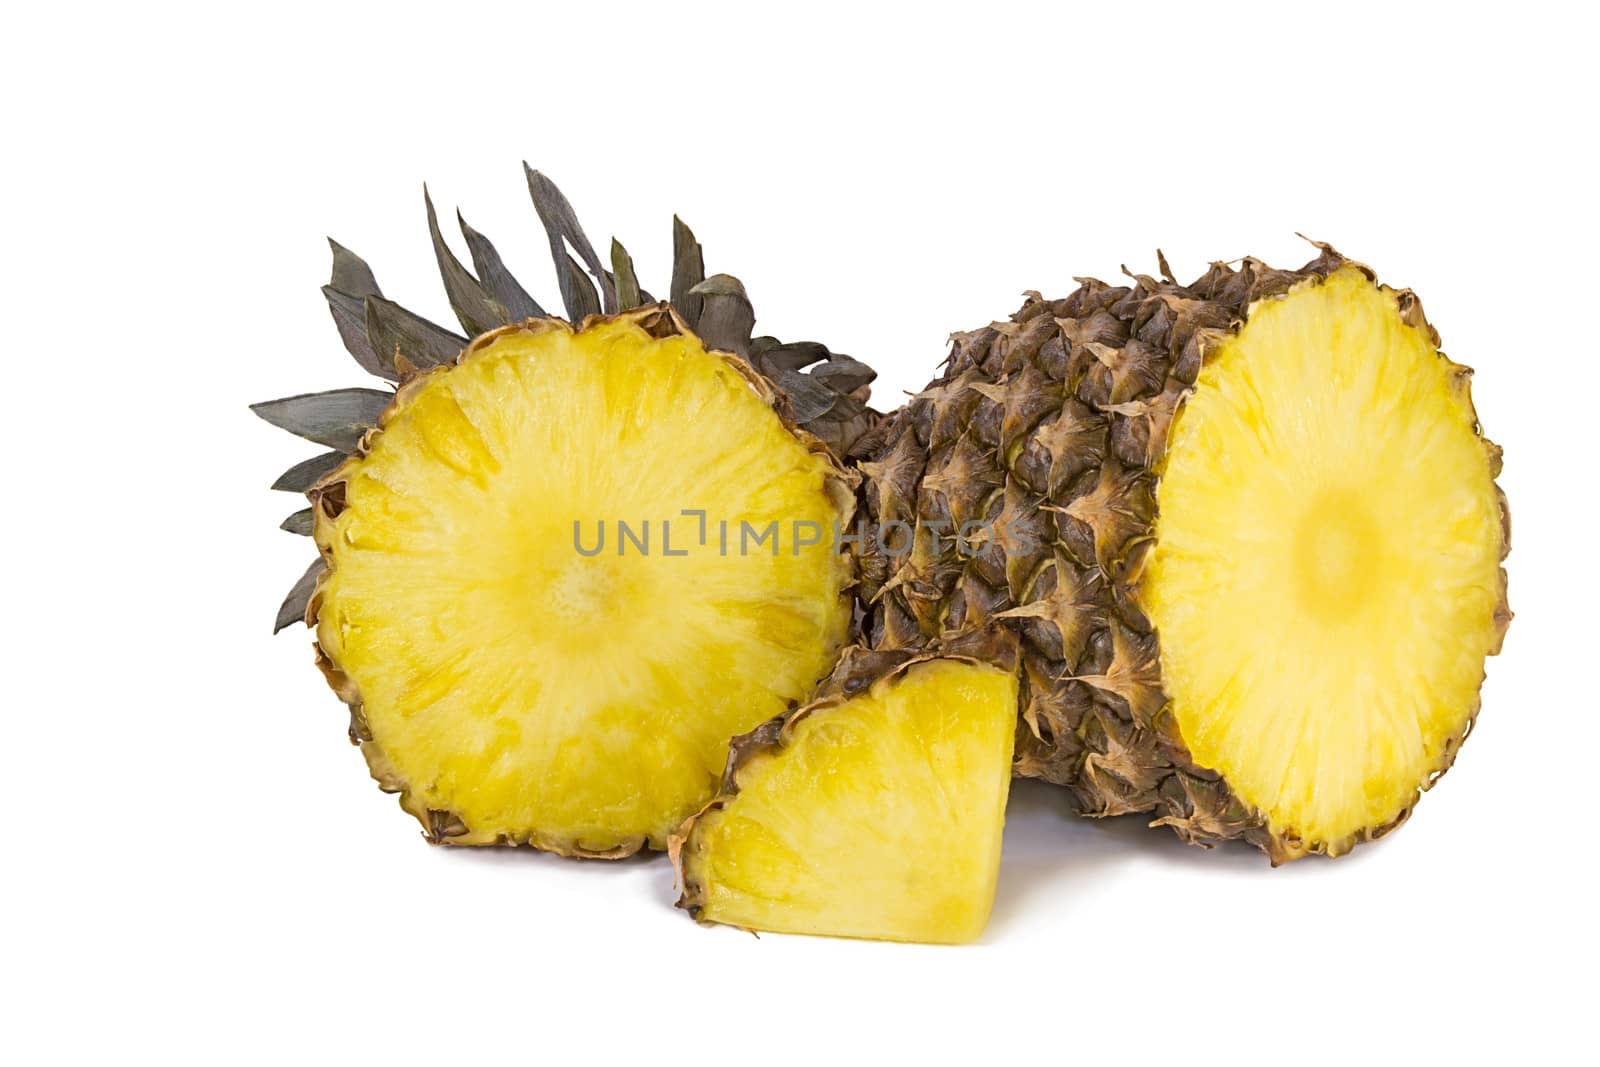 Sliced pineapple and slices of pineapple. Photographed on a white background.